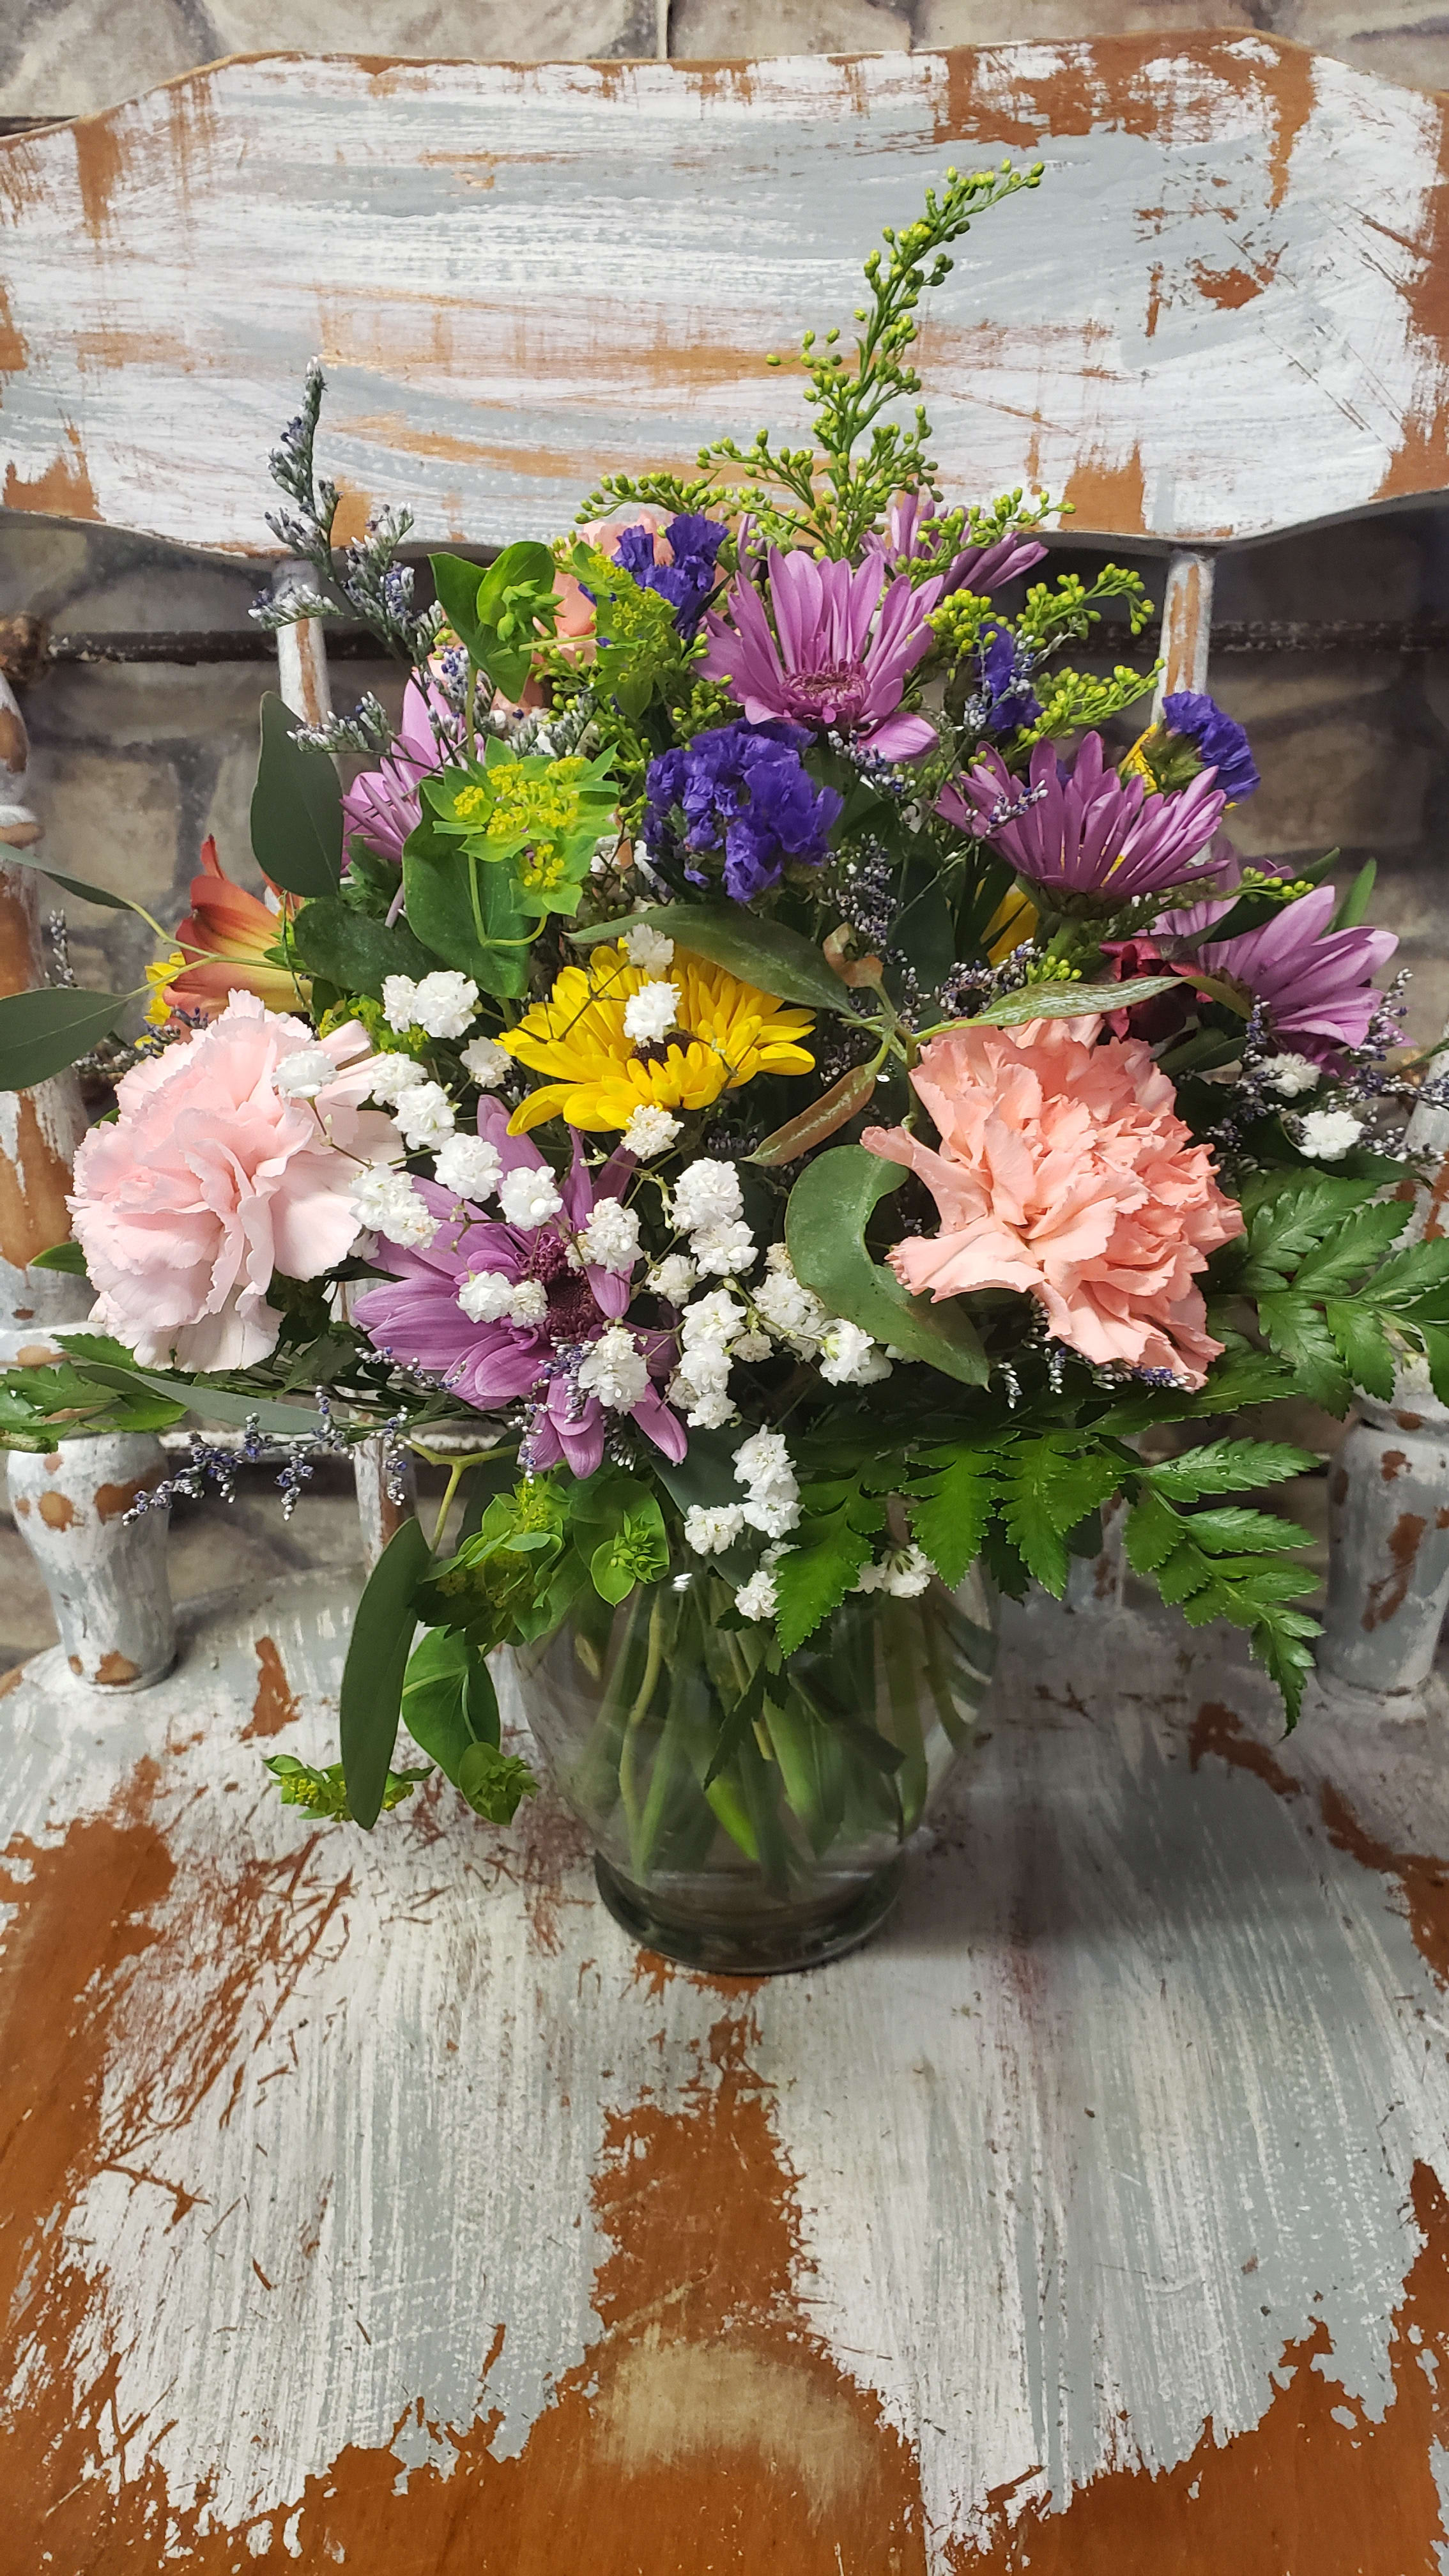 Petite Charmer - Sweet circular design of freshly mixed colors &amp; flowers based on market fresh inventory and availability at time of order/delivery. Flowers and colors can vary at times.